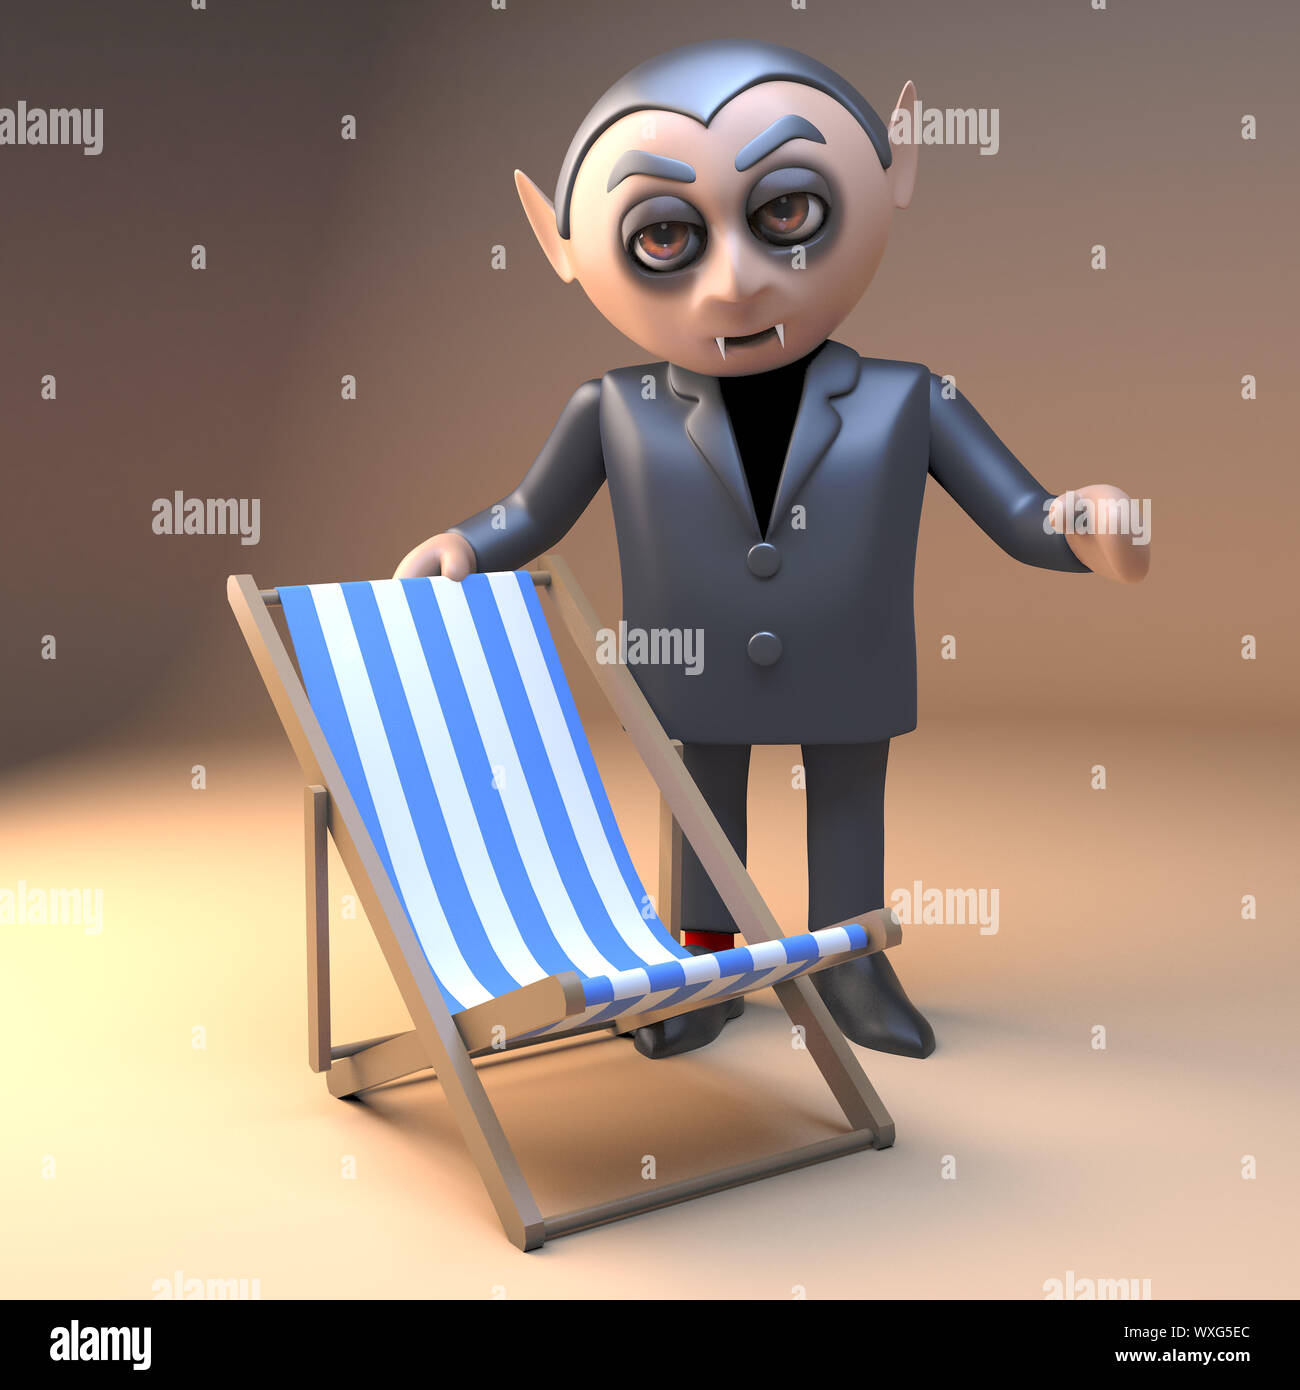 Cartoon dracula vampire 3d Halloween character standing by a deck chair, 3d illustration render Stock Photo